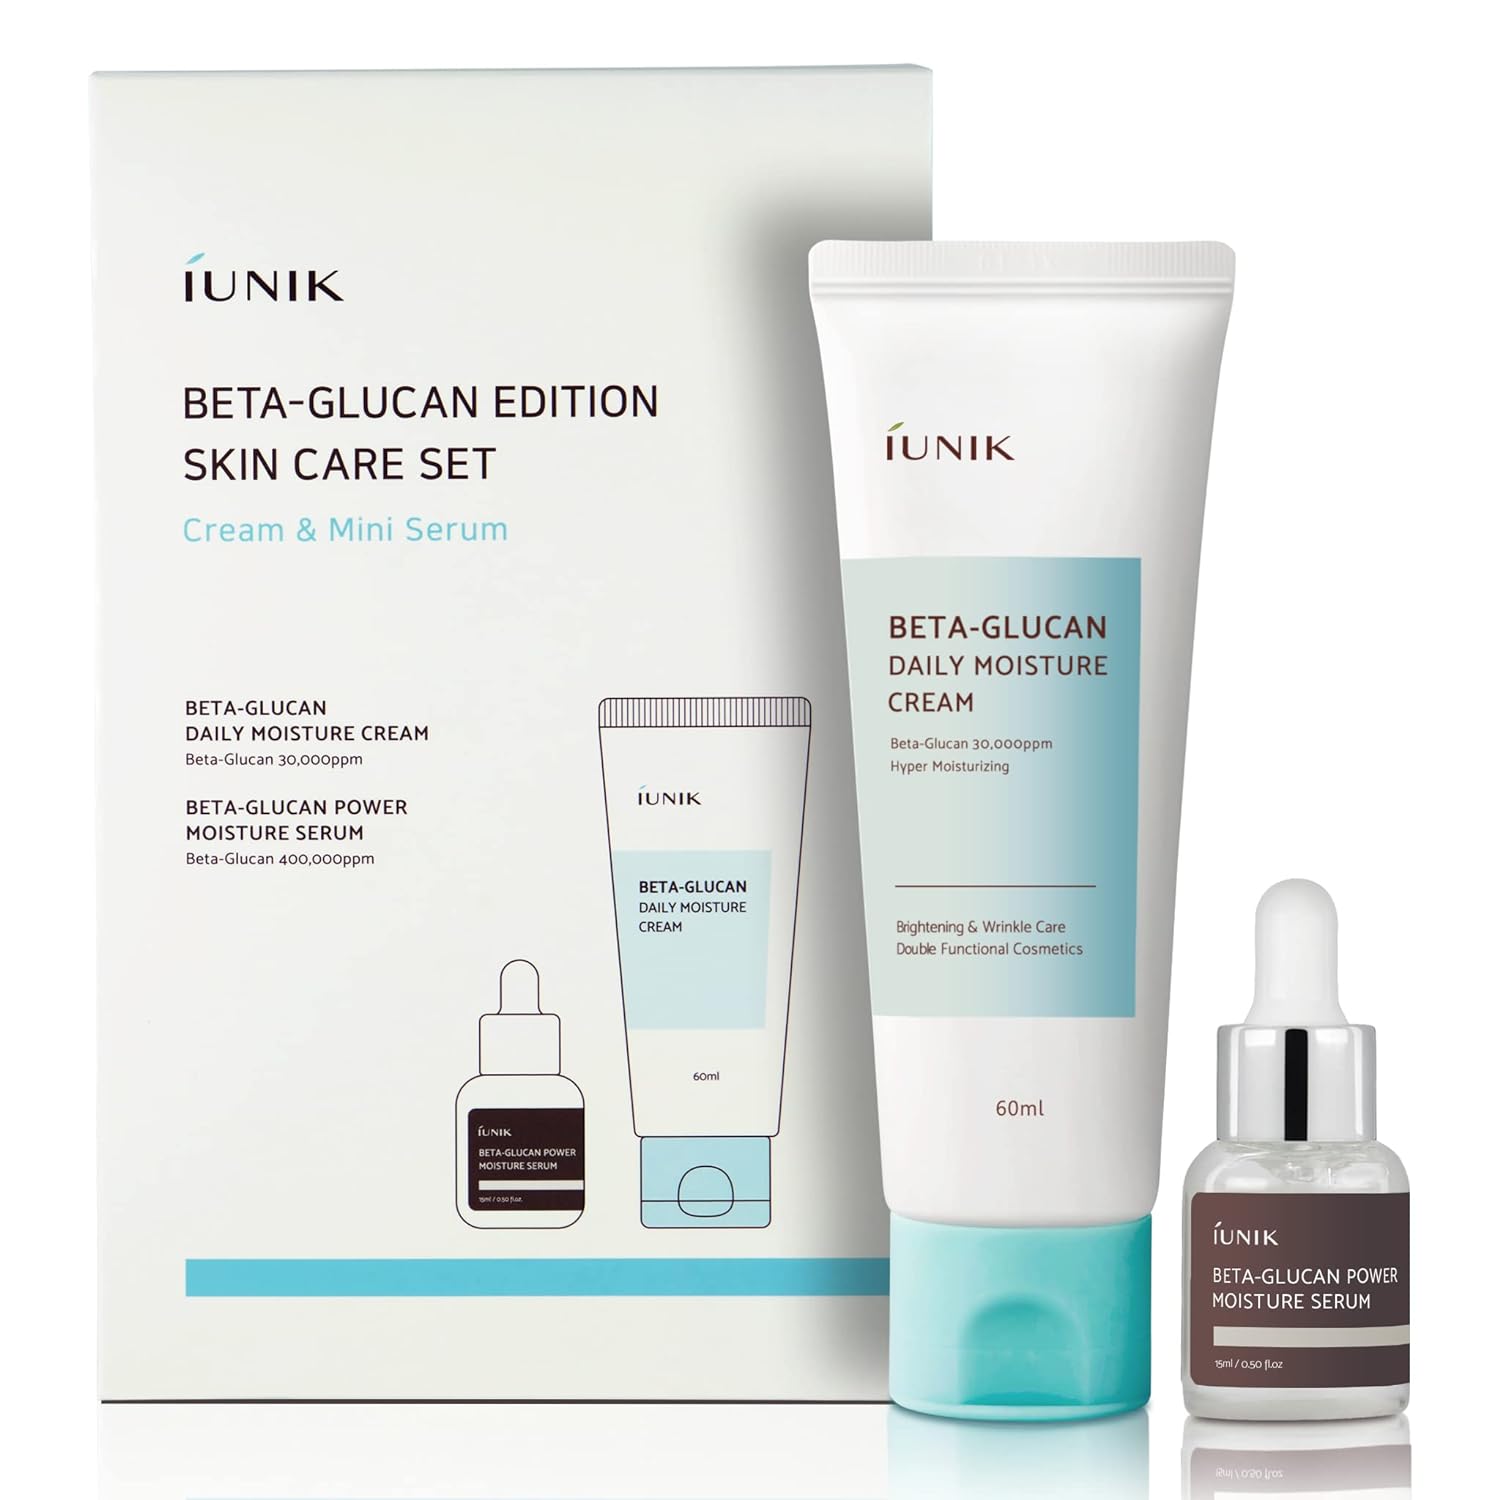 IUNIK Beta-Glucan Edition Skincare Set (Cream 2.02 .. & Mini Serum 0.51 ..) - Featuring the Powerful Beta-Glucan to Moisturize, Revitalize, and Reinforce the Skin with EWG-Green Ingredients